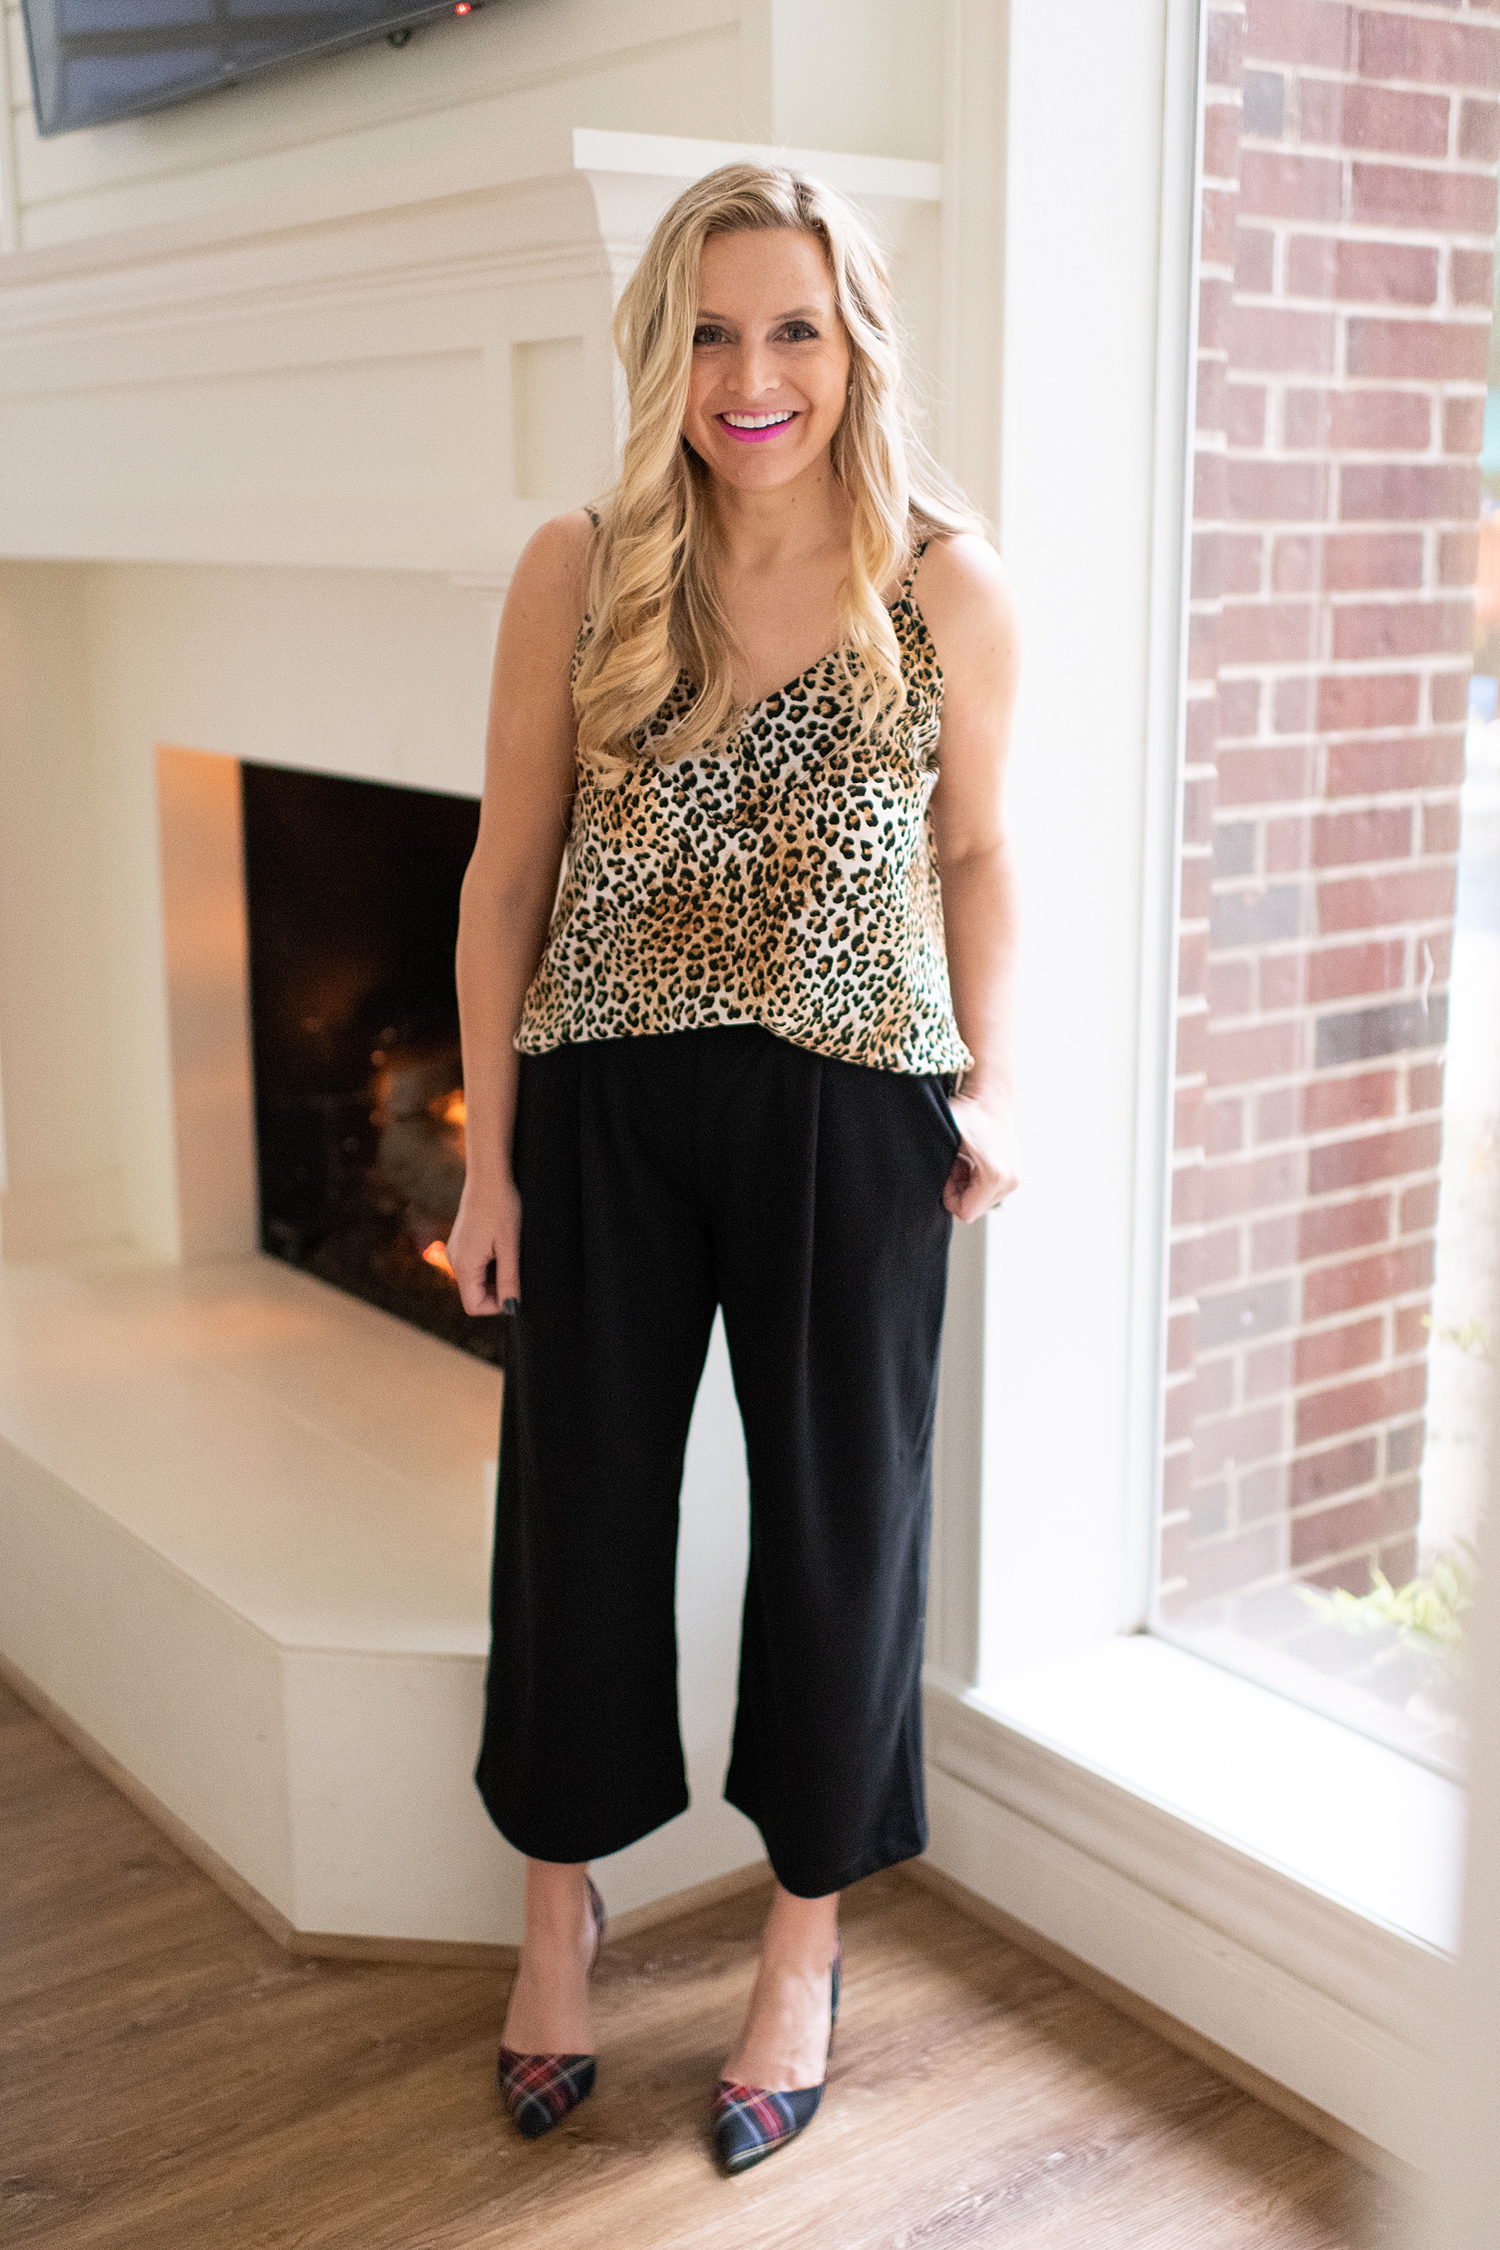 Fancy Ashley x Social Threads collection featured by top Houston fashion blogger, Fancy Ashley: image of a woman wearing a Social Threads Leopard camisole and Social Threads cropped wide legged pants